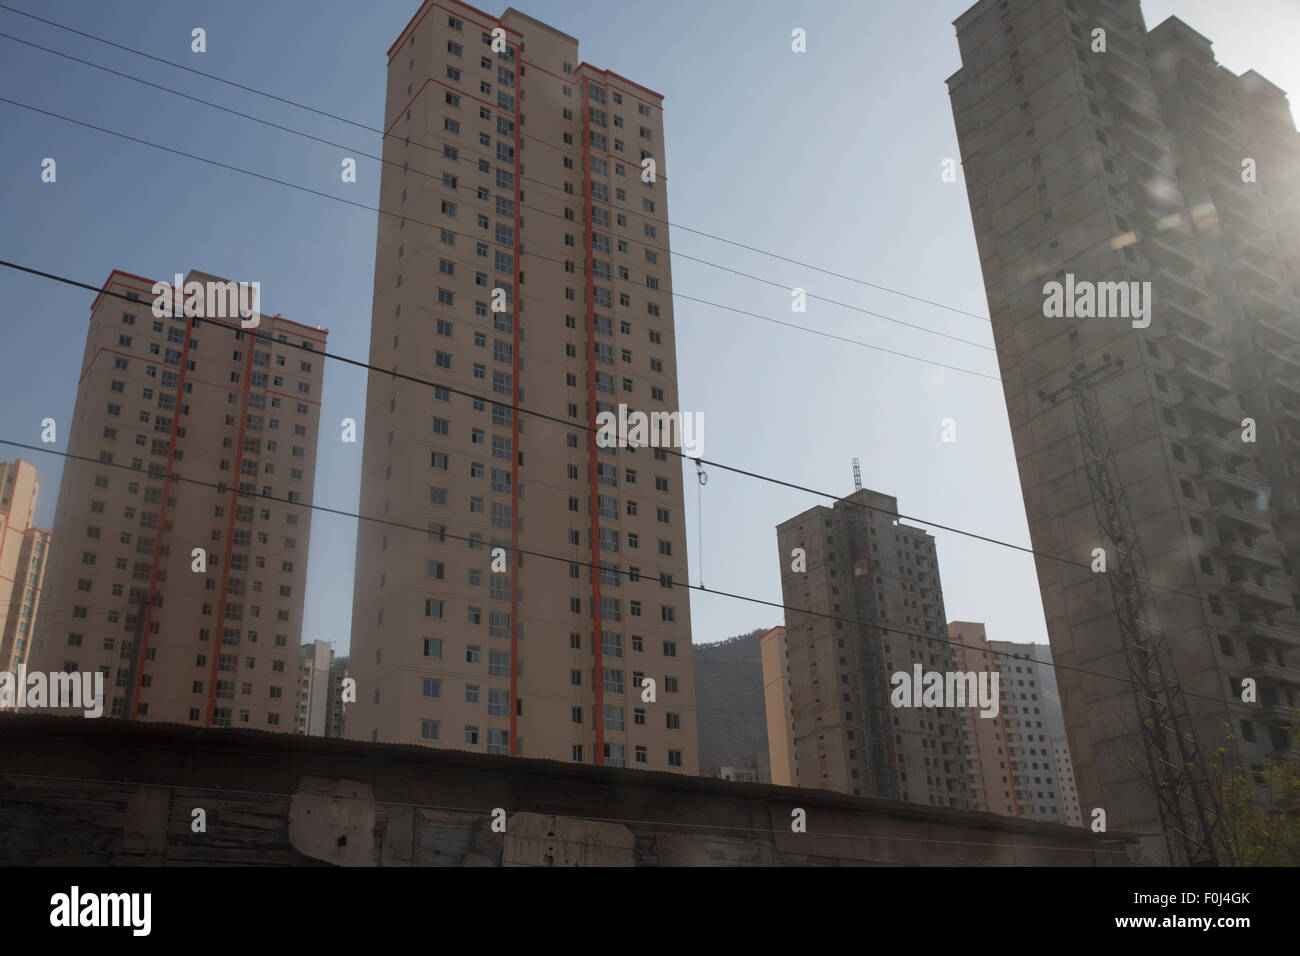 Urban development and high residential buildings along the train line in the North East of China, 2013. Stock Photo